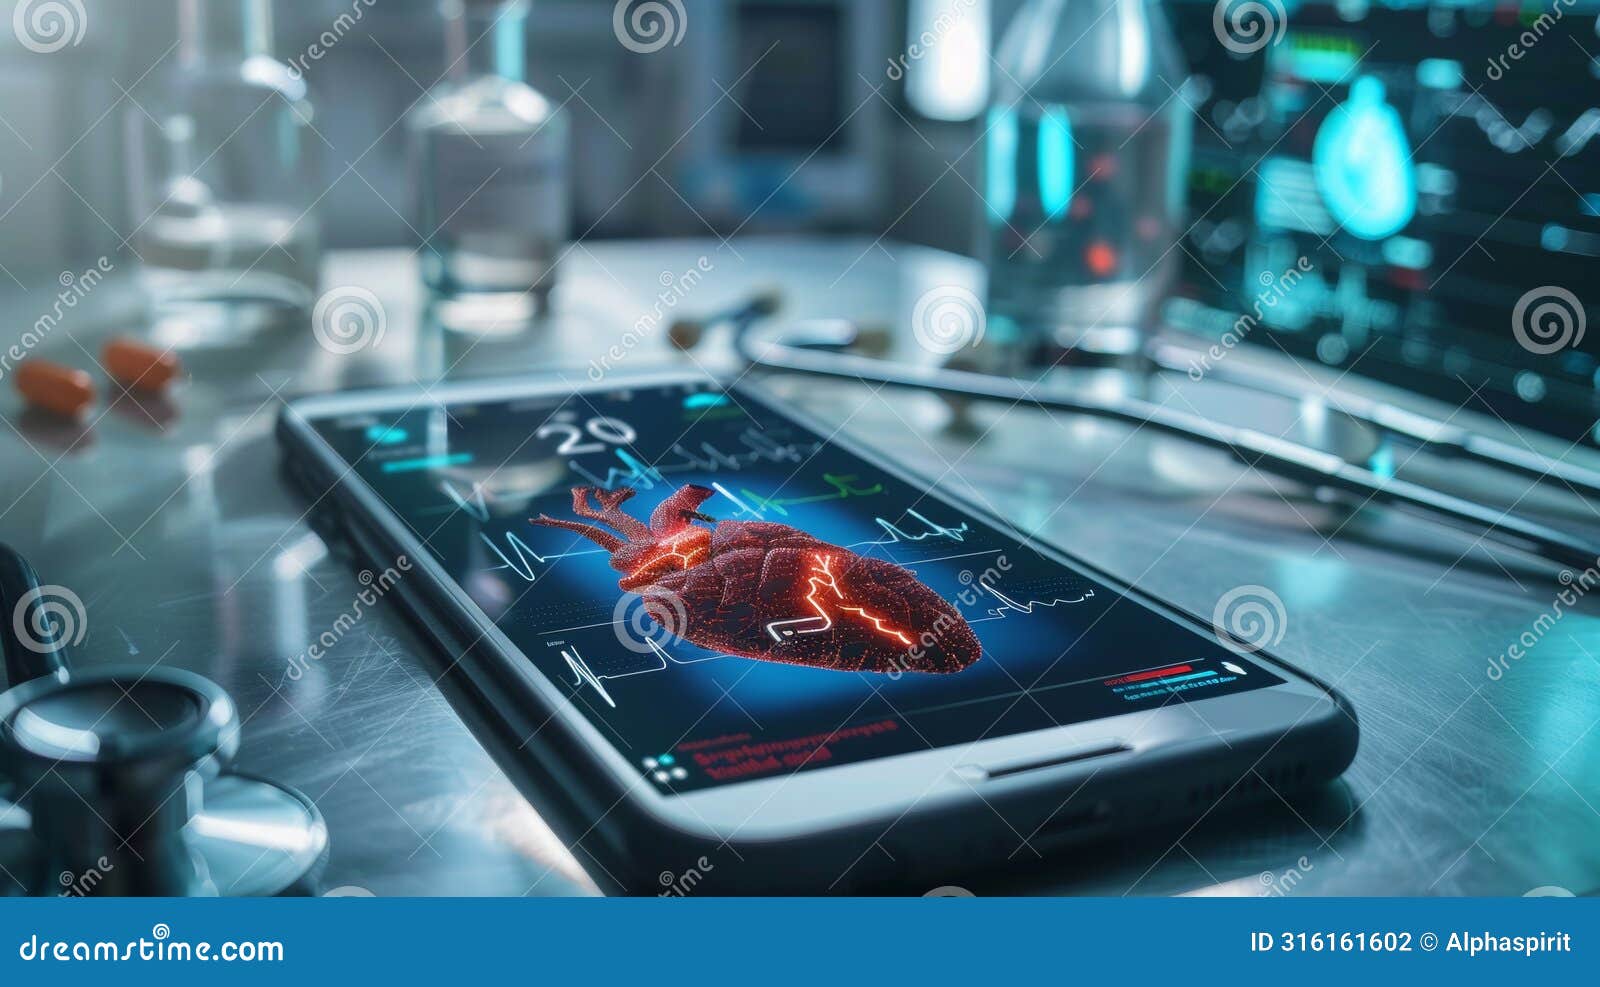 medical workspace featuring a 3d heart model on a smartphone's advanced e-health application